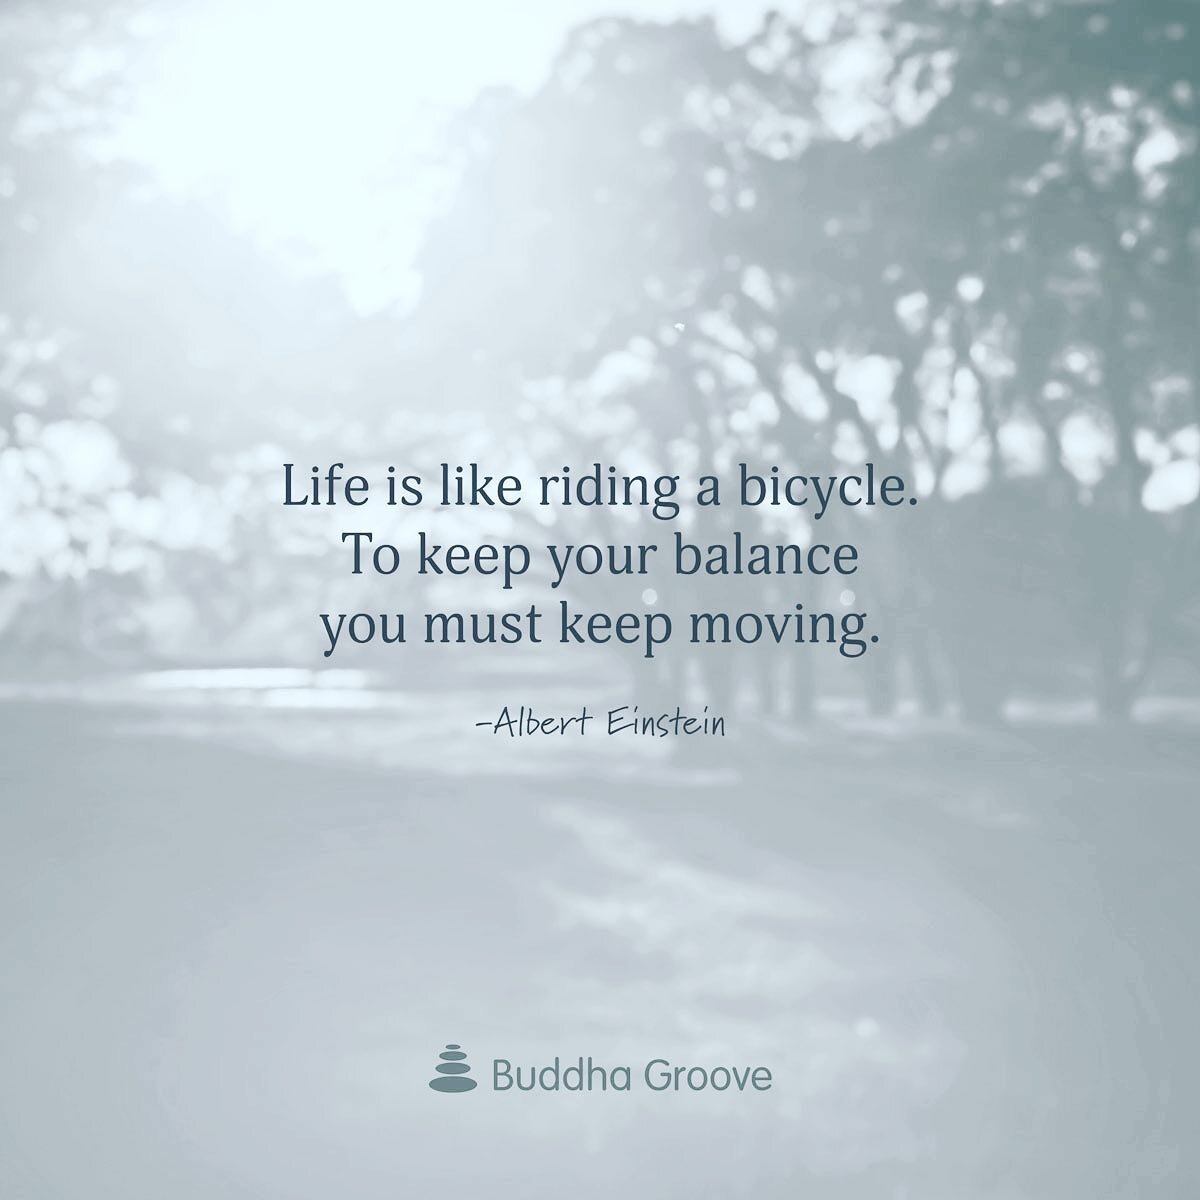 I&rsquo;m focusing on balance this month. Balance is not about standing still and preserving a space, but being in constant tension with the push and pull of life. When you feel &lsquo;off,&rsquo; it&rsquo;s the body and mind calling you to come back